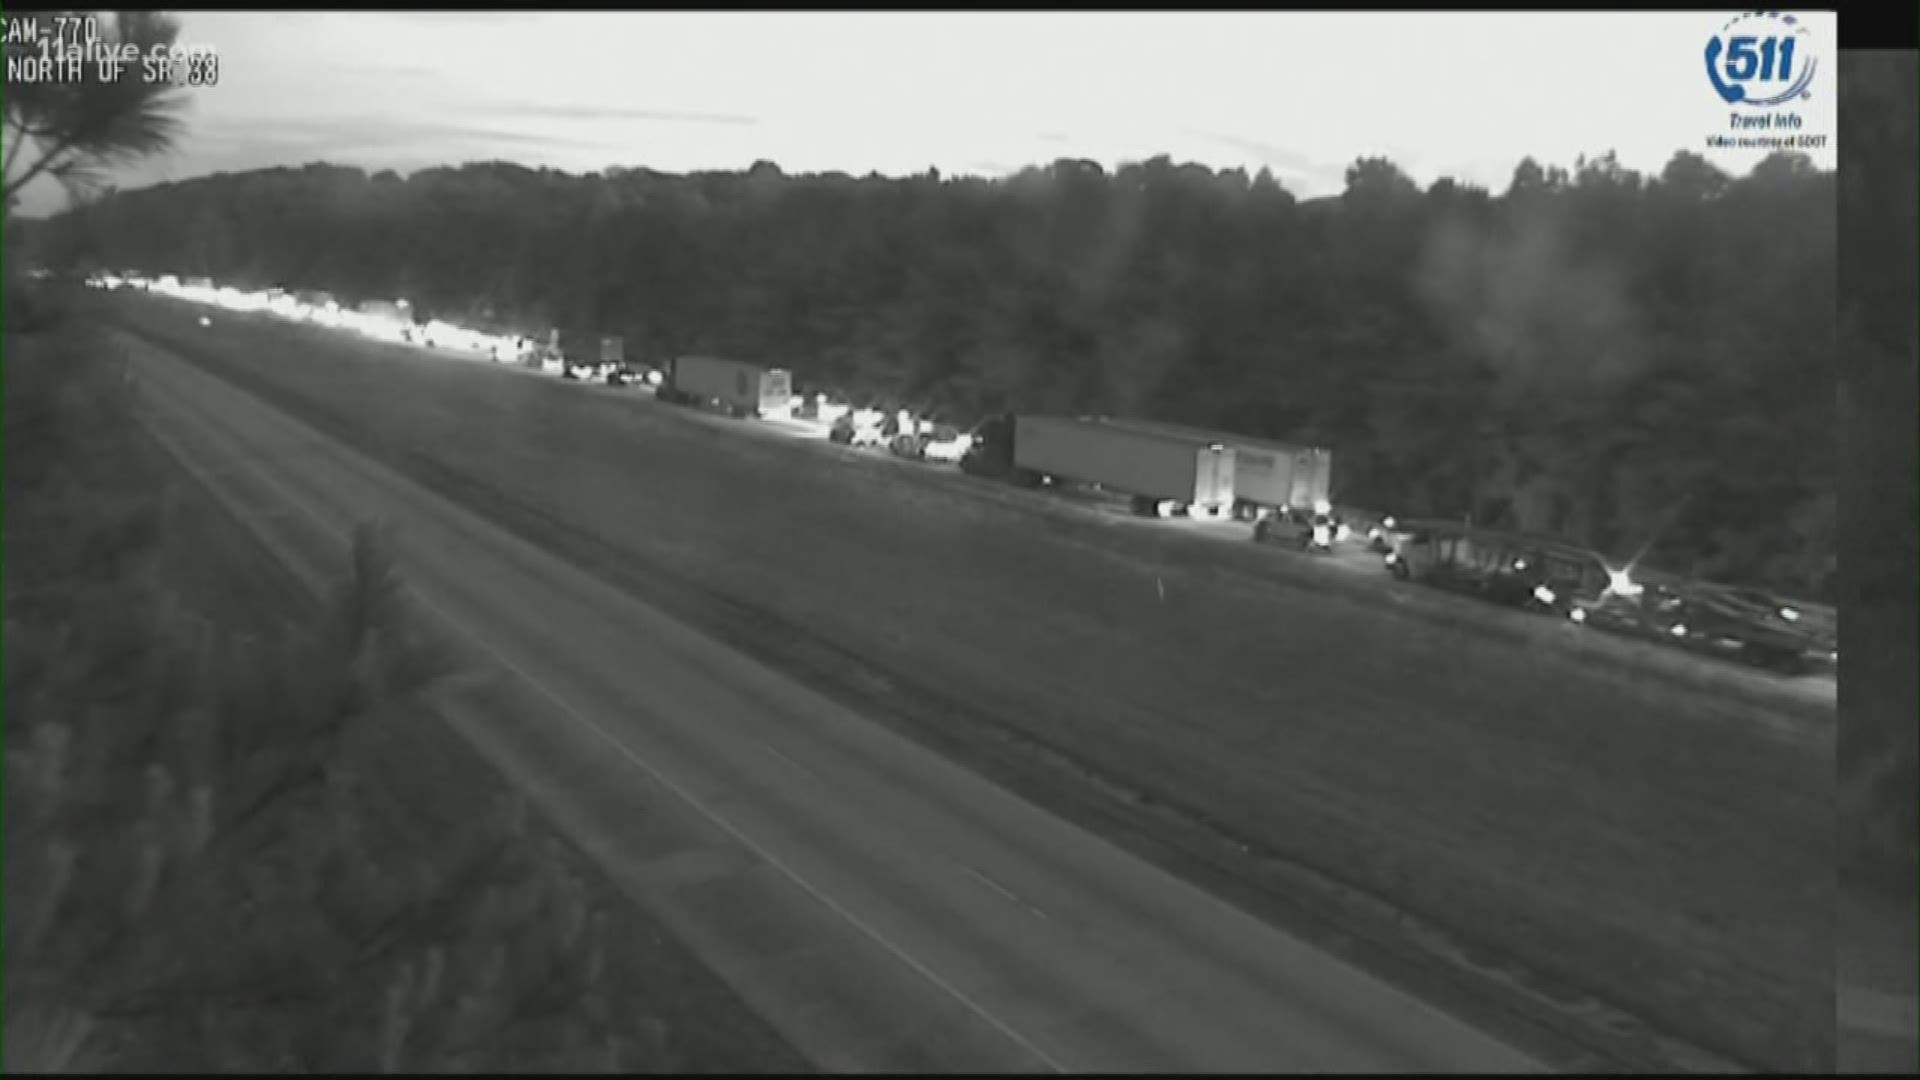 Delays are mounting back to I-75. Here's a way around the bumper to bumper traffic.